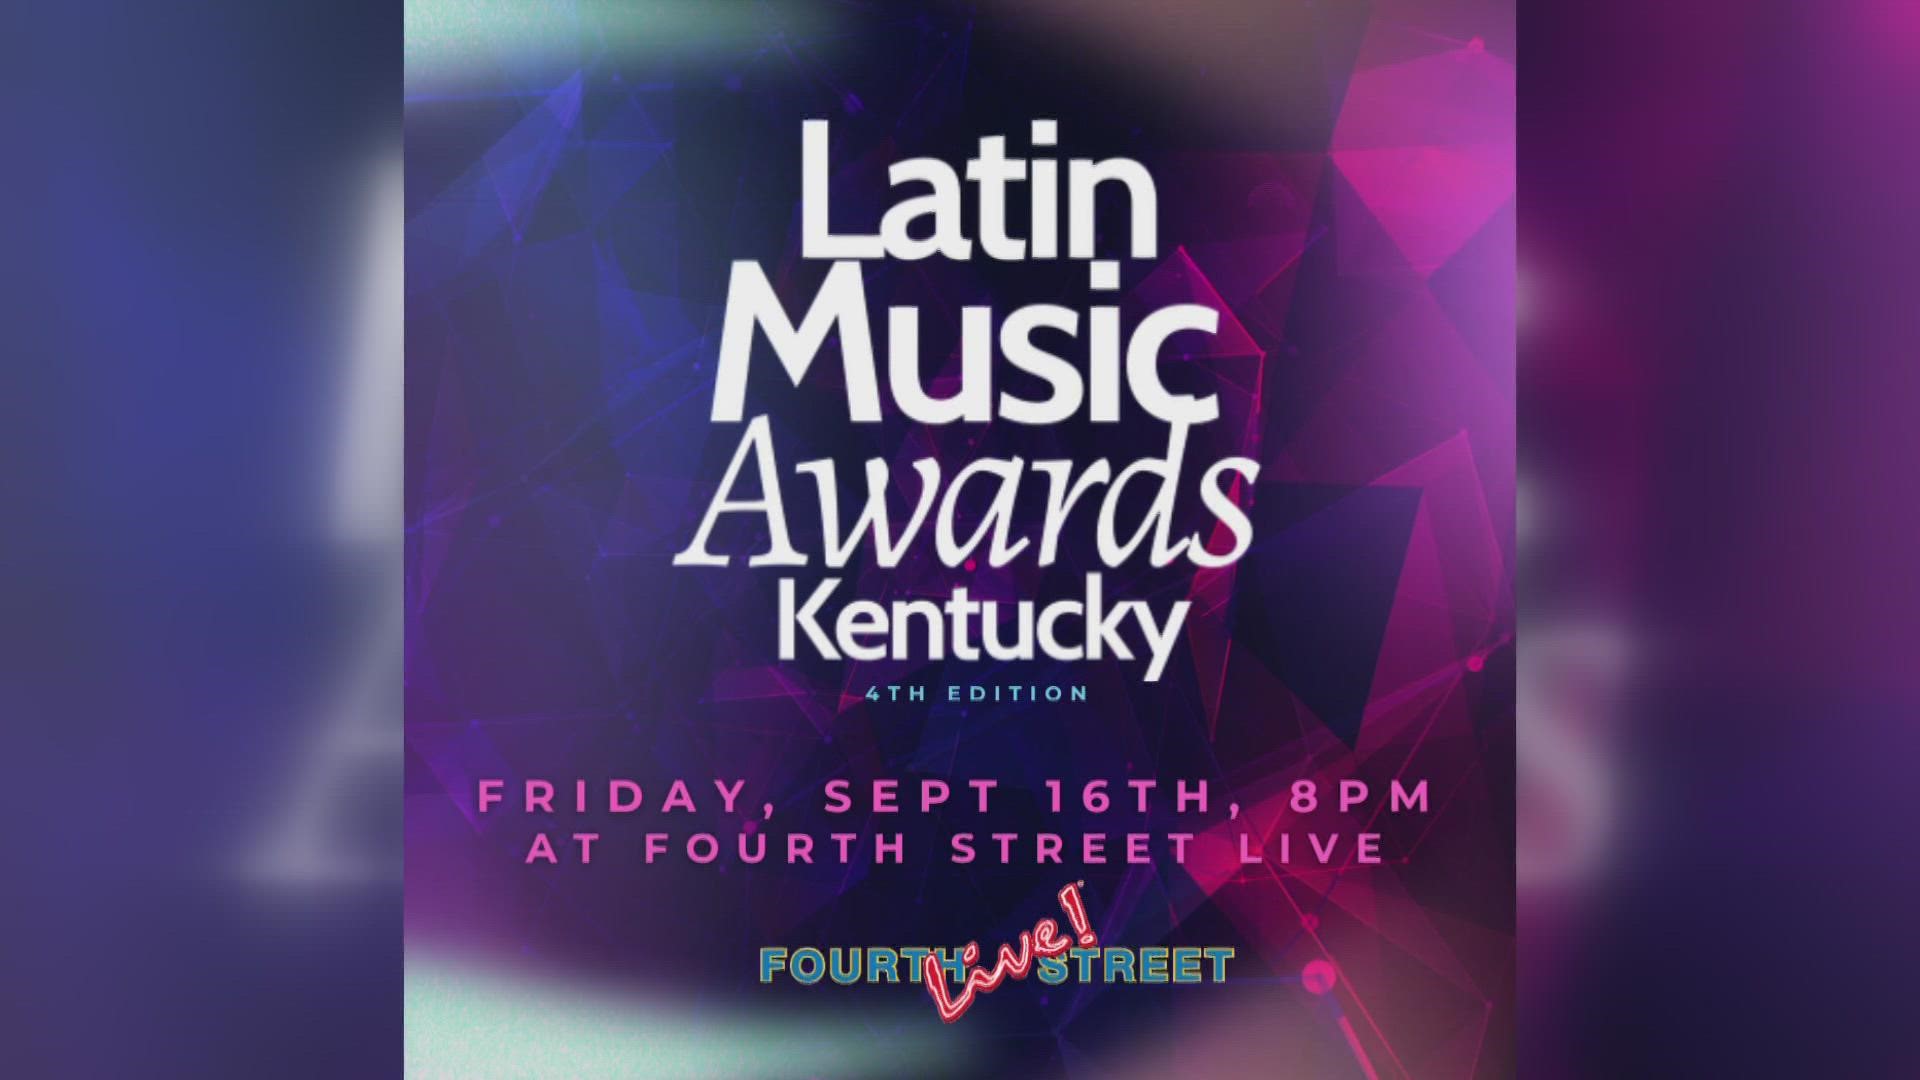 This unique, multicultural and diverse music event will feature Latin artists who live in Kentucky and represent many countries from Latin America.